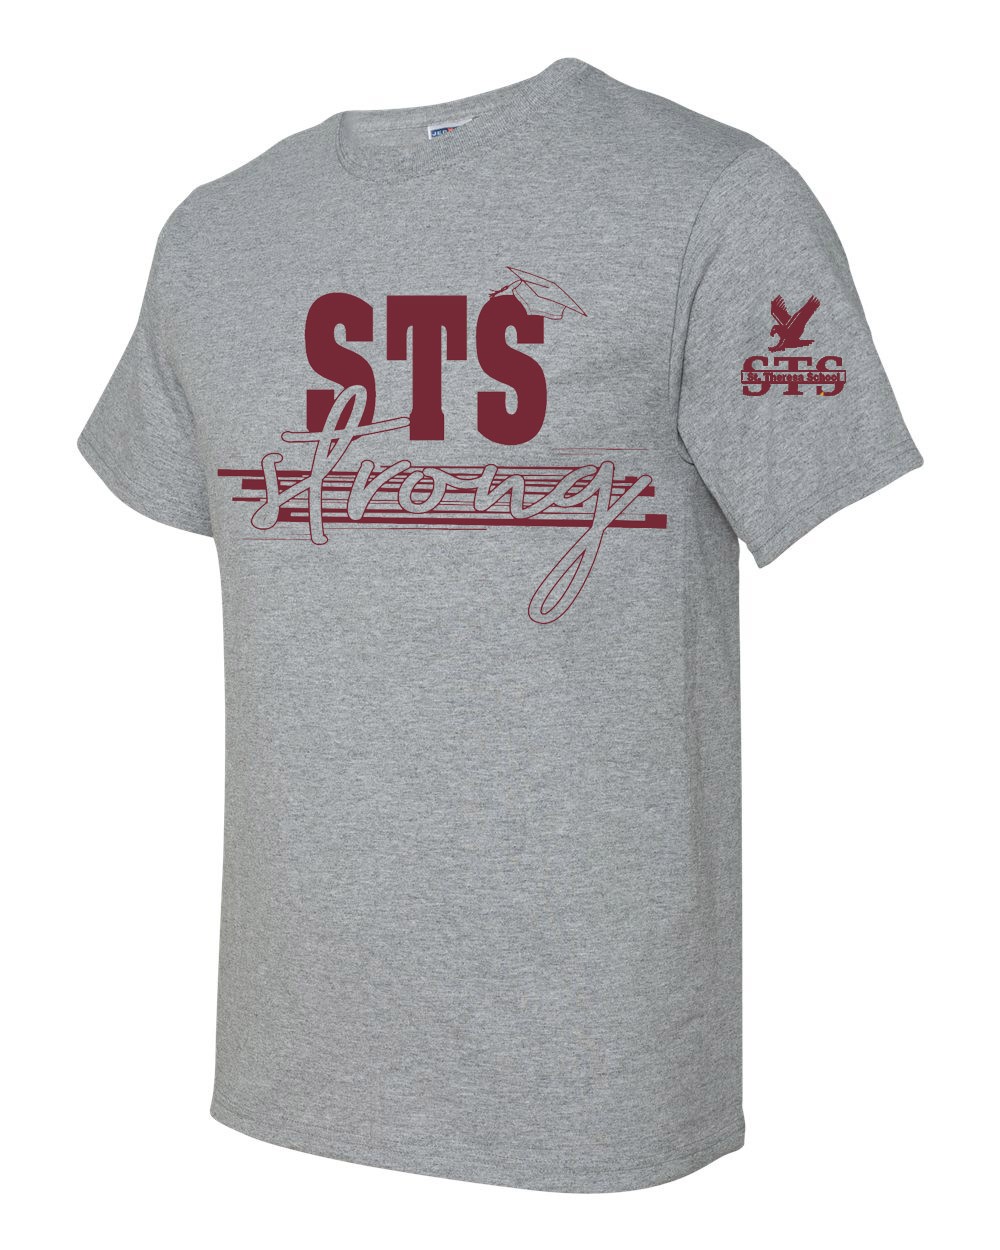 STS S/S Strong Spirit T-Shirt w/ Maroon Logo - Please Allow 2-3 Weeks for Delivery